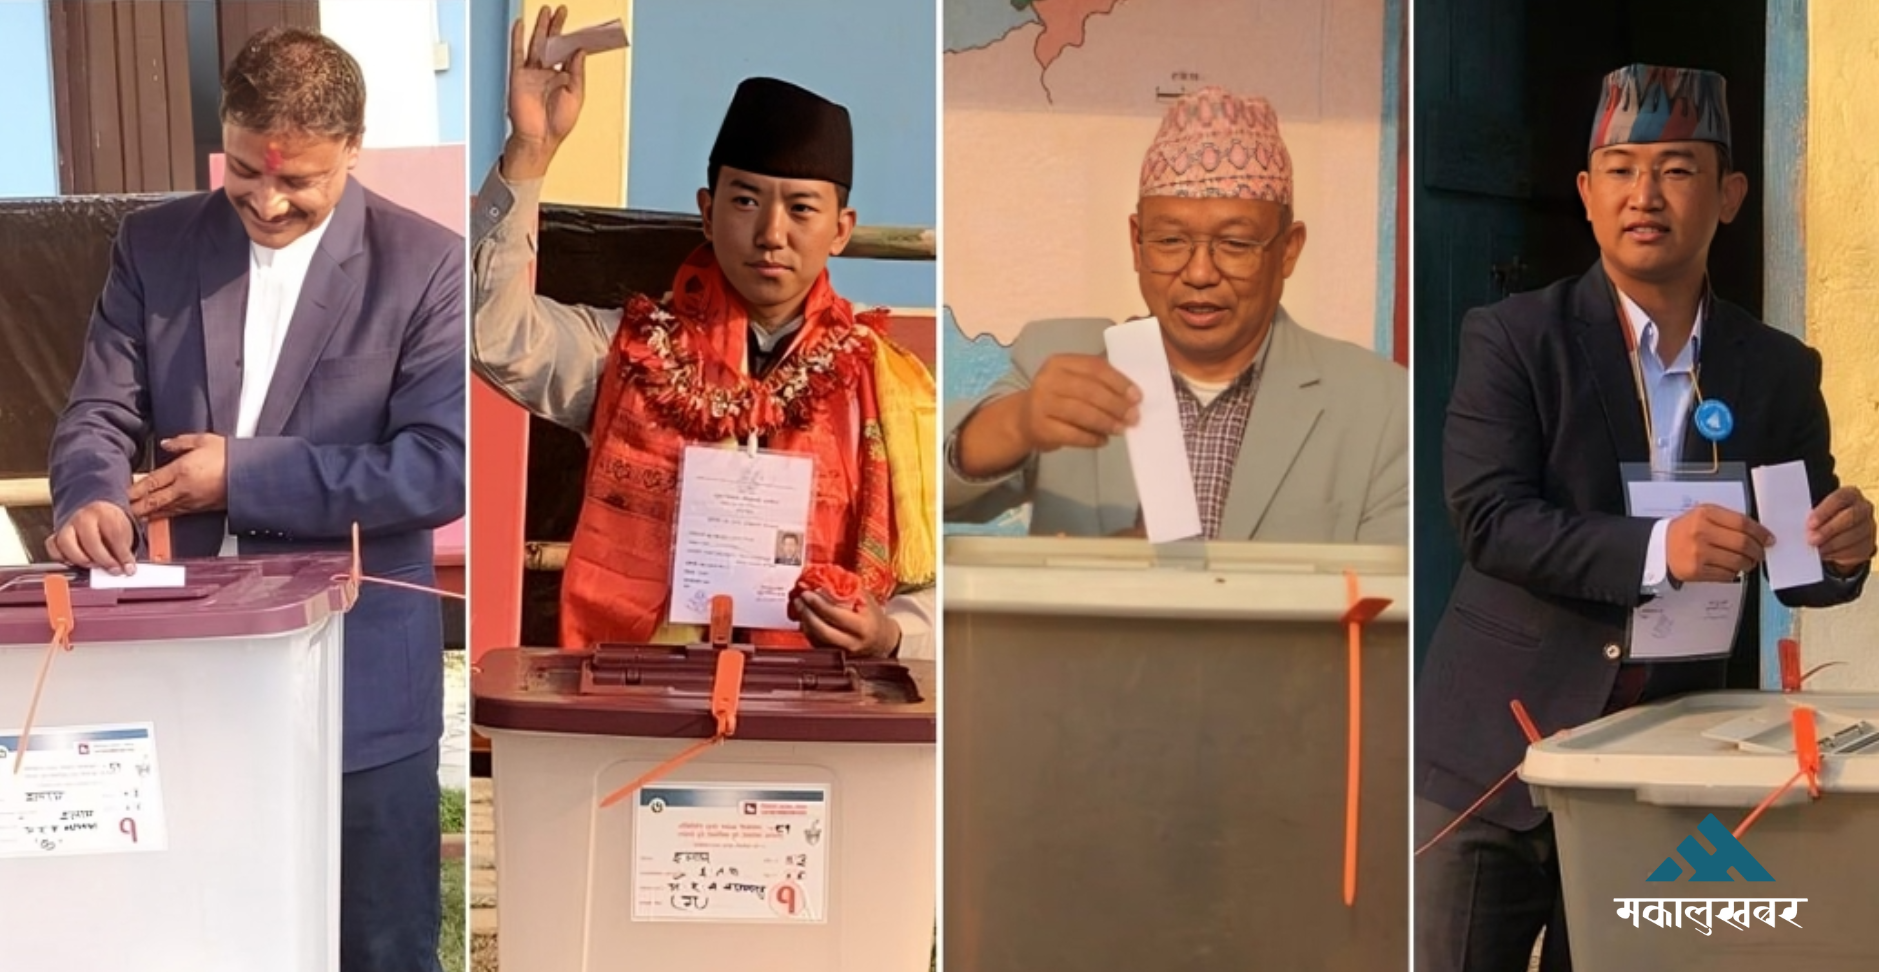 Congress candidate Khadka leads in Ilam-2